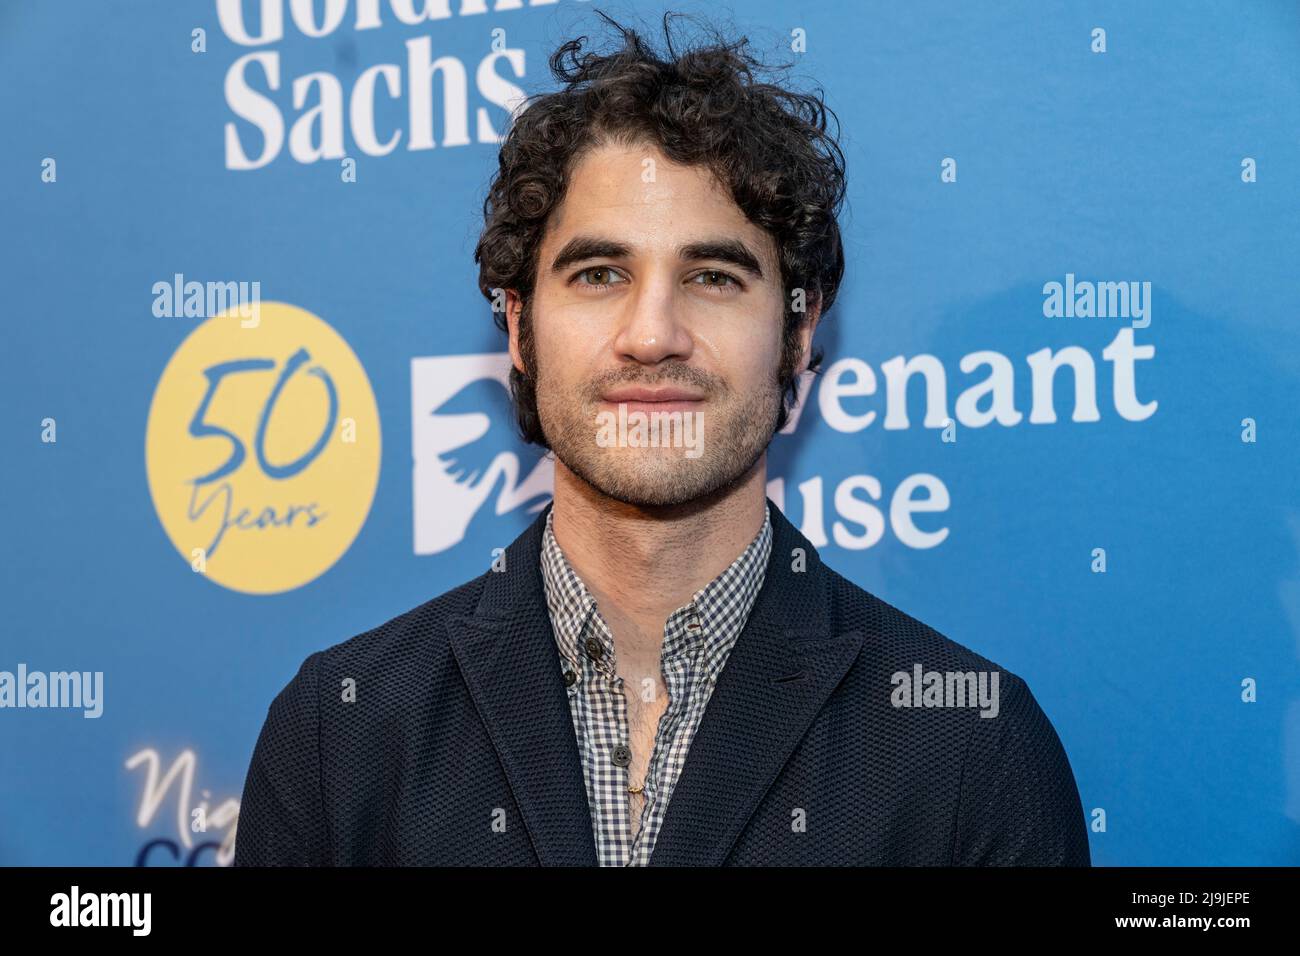 New York, NY - 23. Mai 2022: Darren Criss nimmt an der Covenant House Night of Covenant Stars Gala in Chelsea Industrial Teil Stockfoto